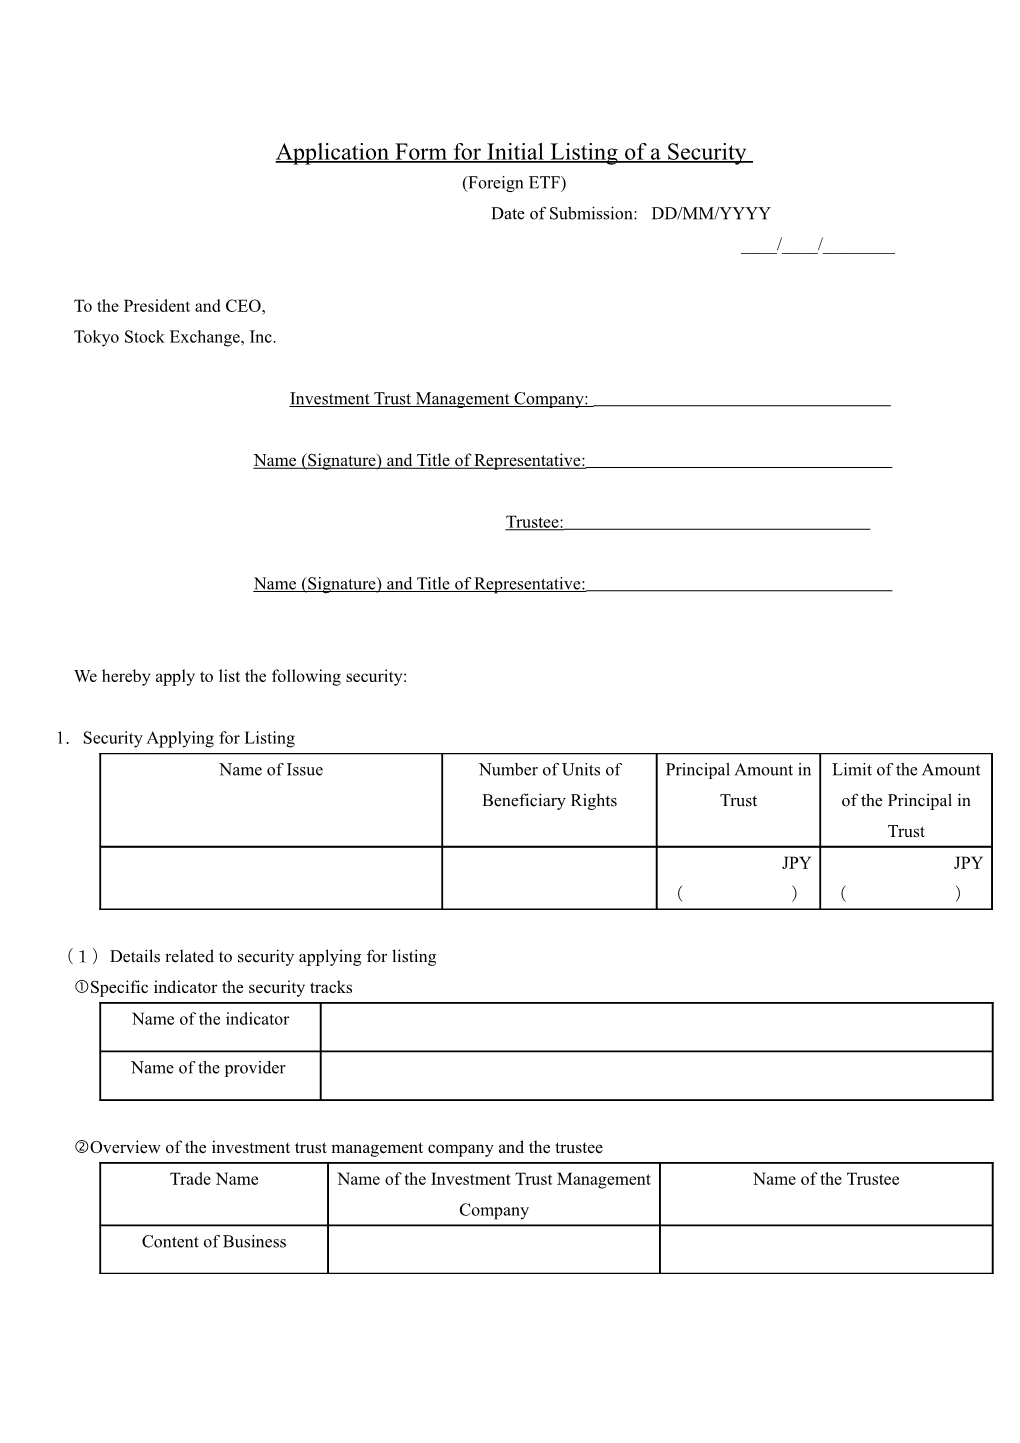 Application Form for Initial Listing of a Security